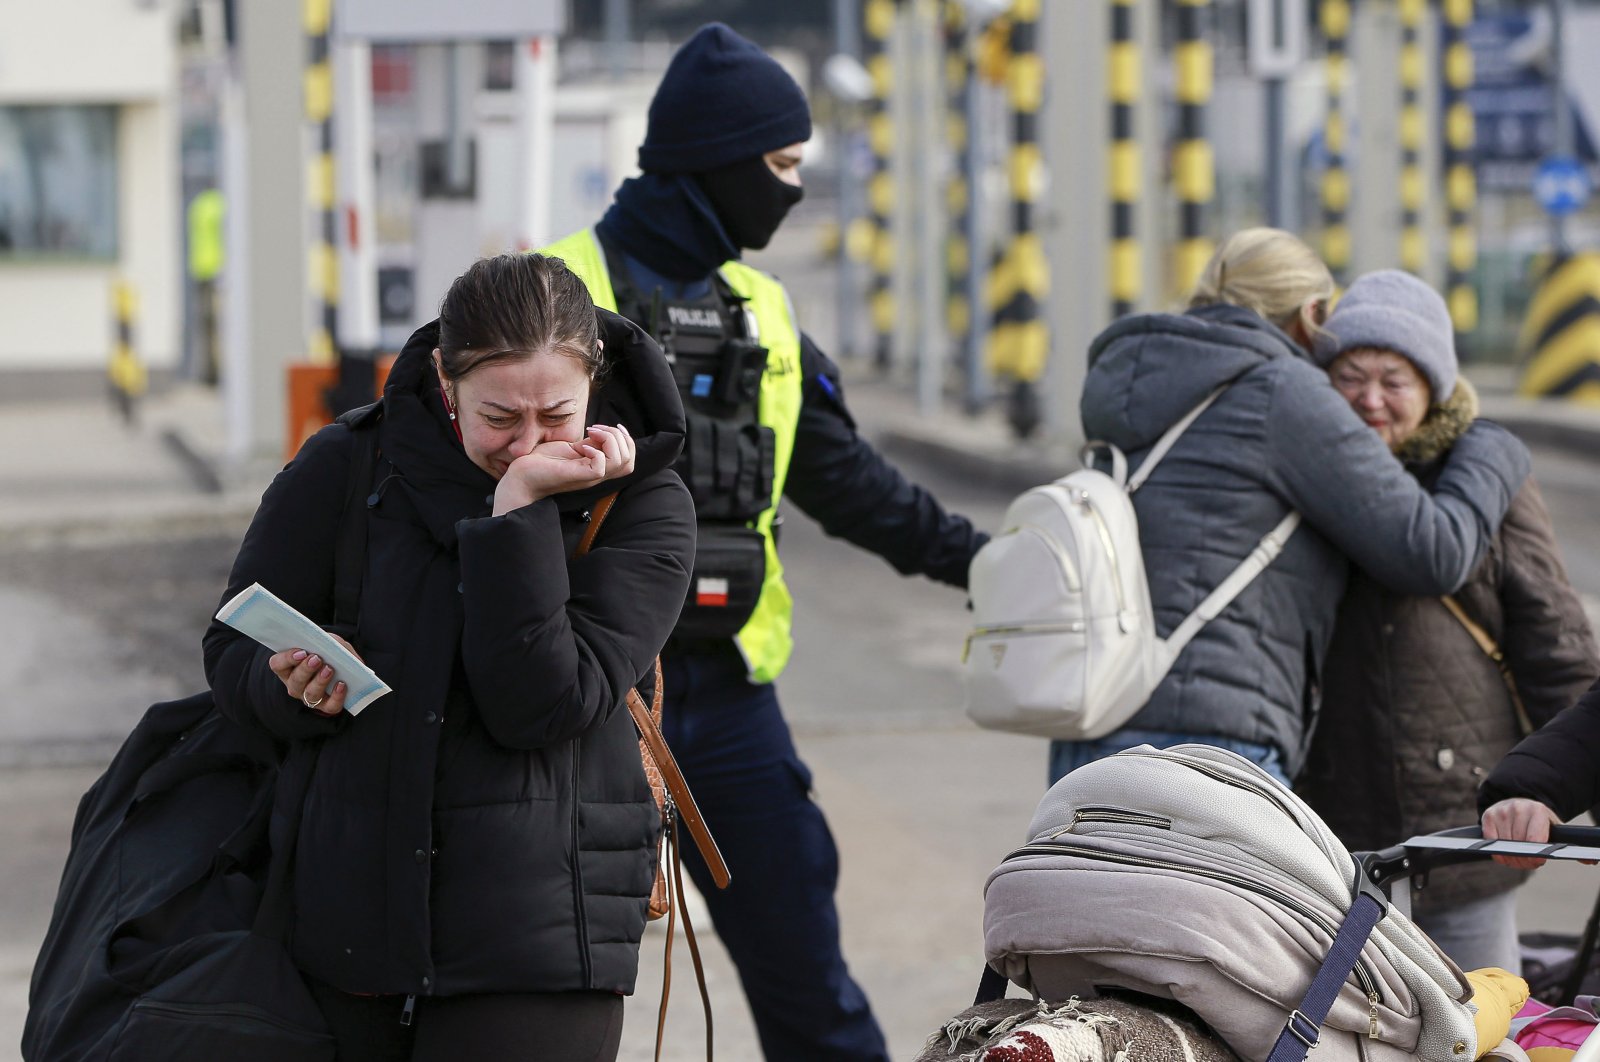 Family members hug as they reunite, after fleeing the conflict in Ukraine, at the Medyka border crossing, in Poland, Feb. 27, 2022. (AP Photo)